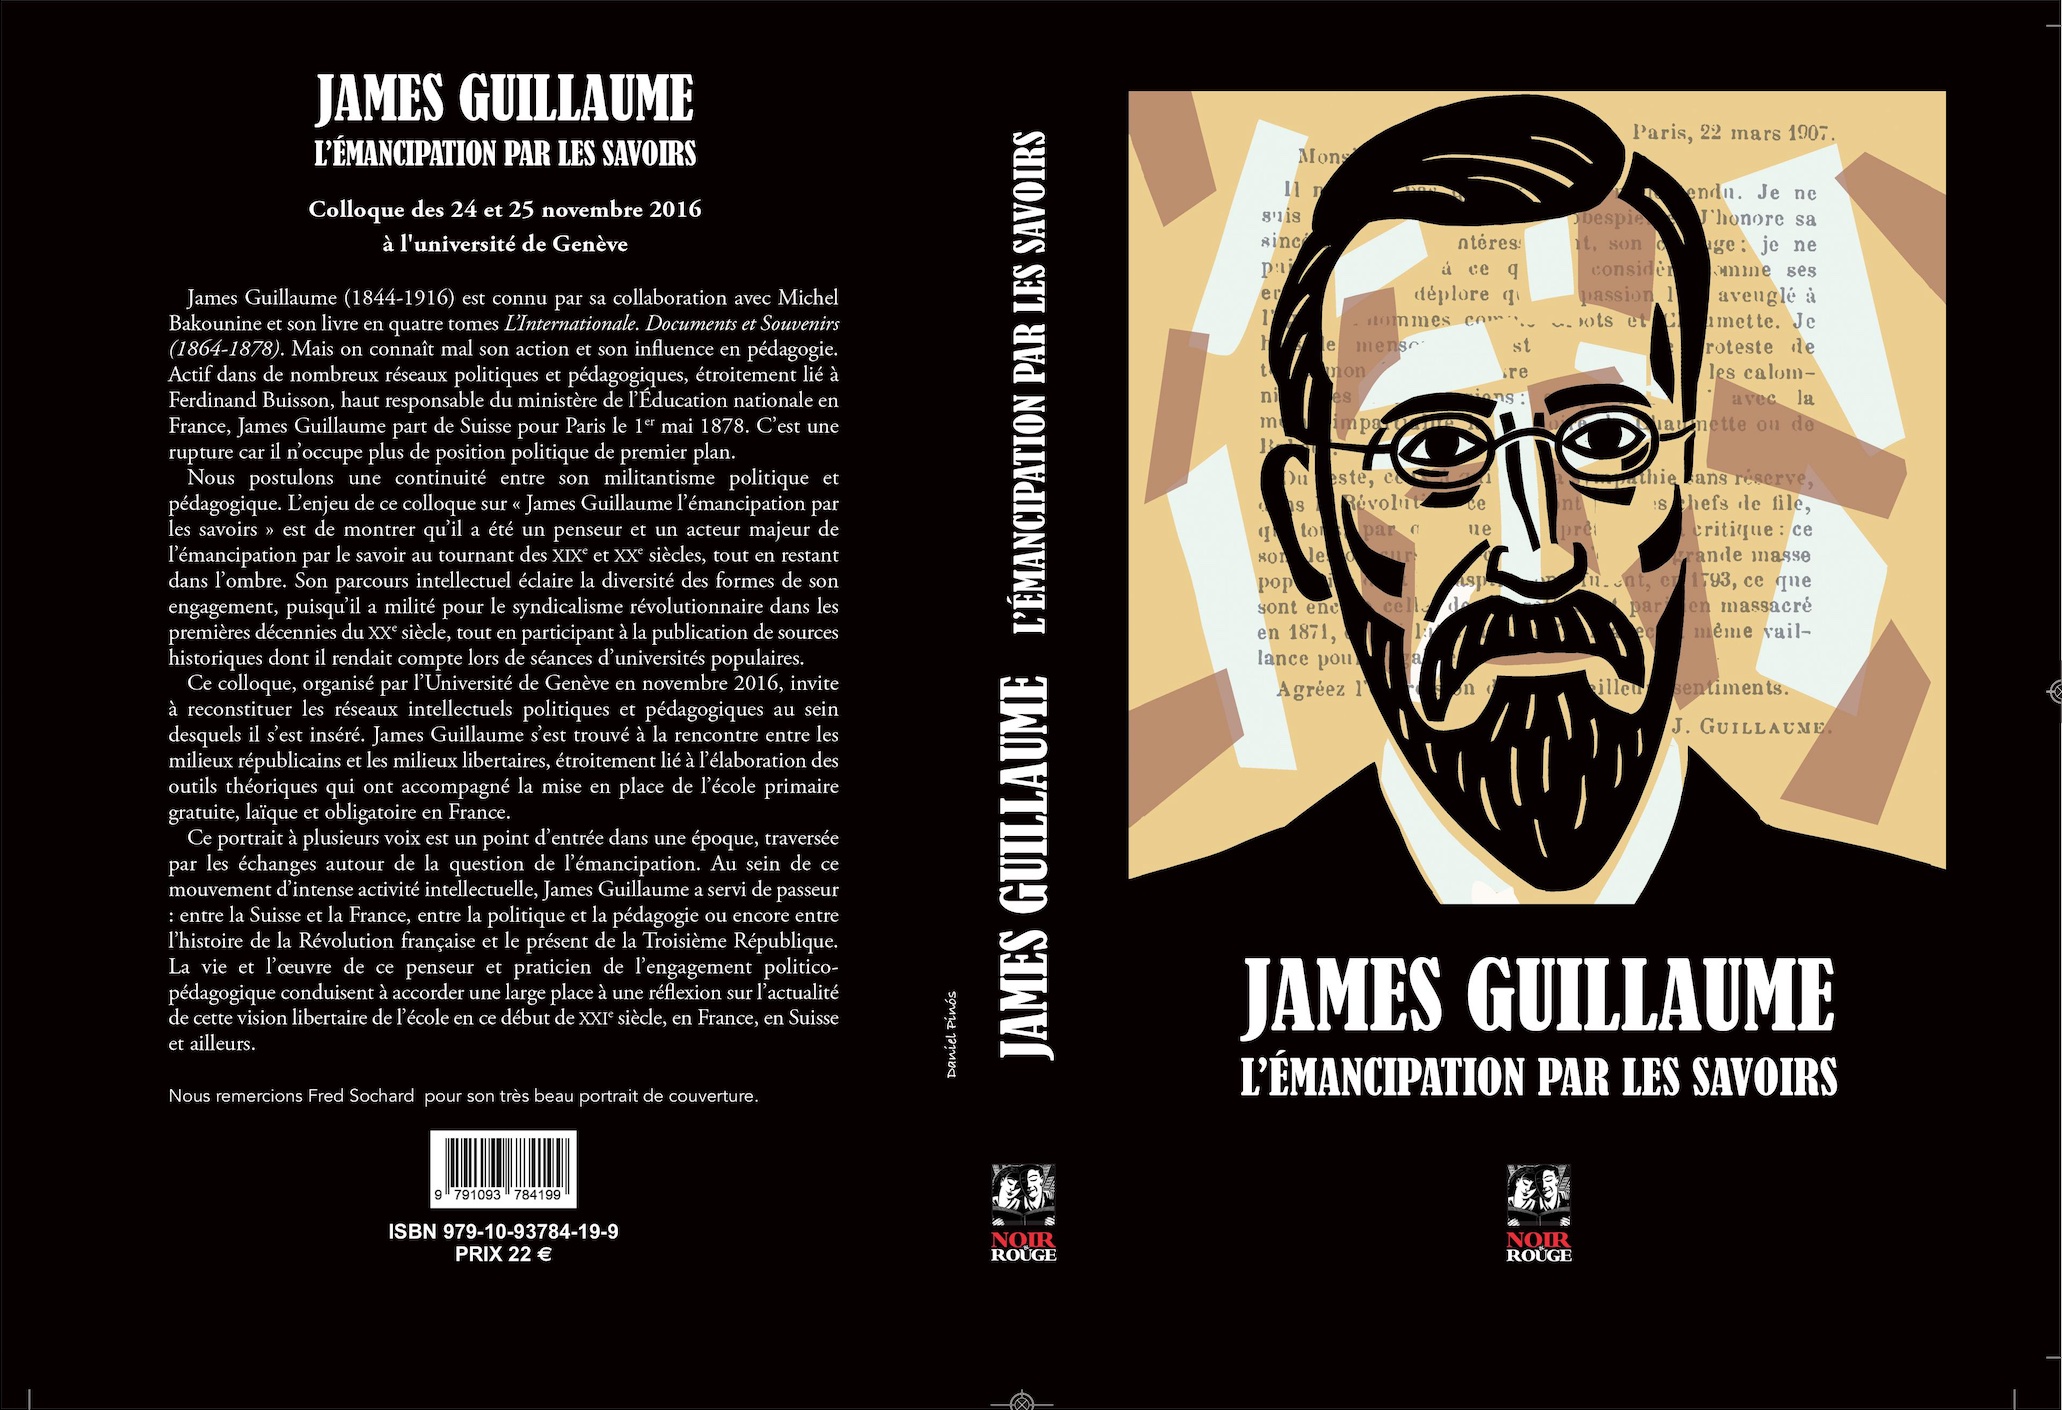 Couverture James Guillaume.jpg